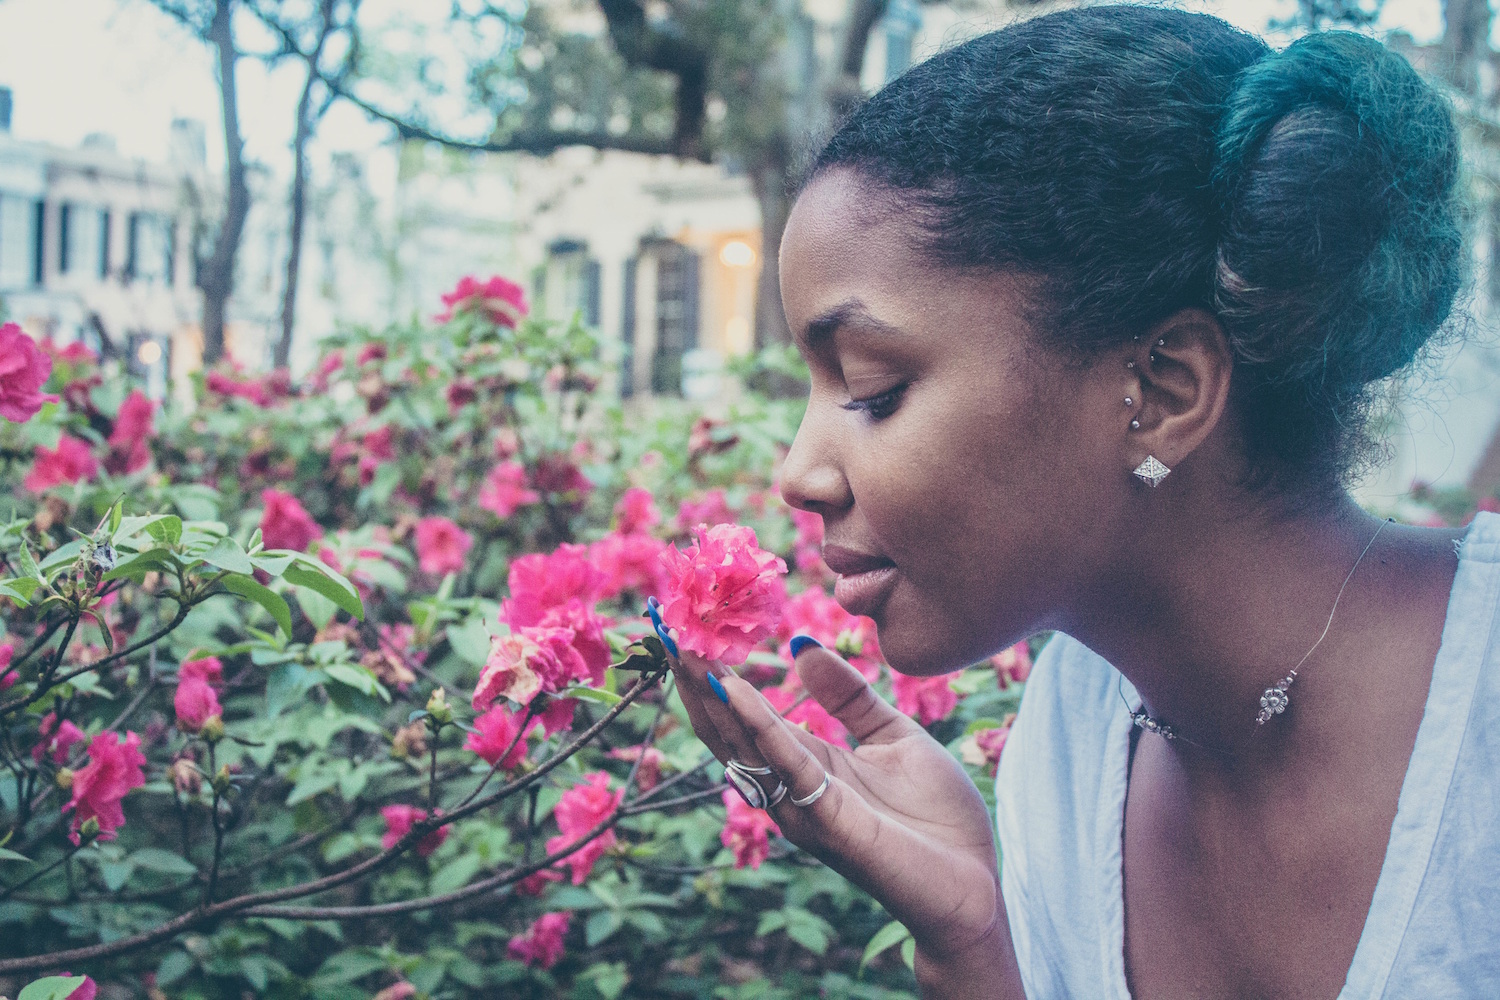 Close up image of a Black woman smelling a pink flower